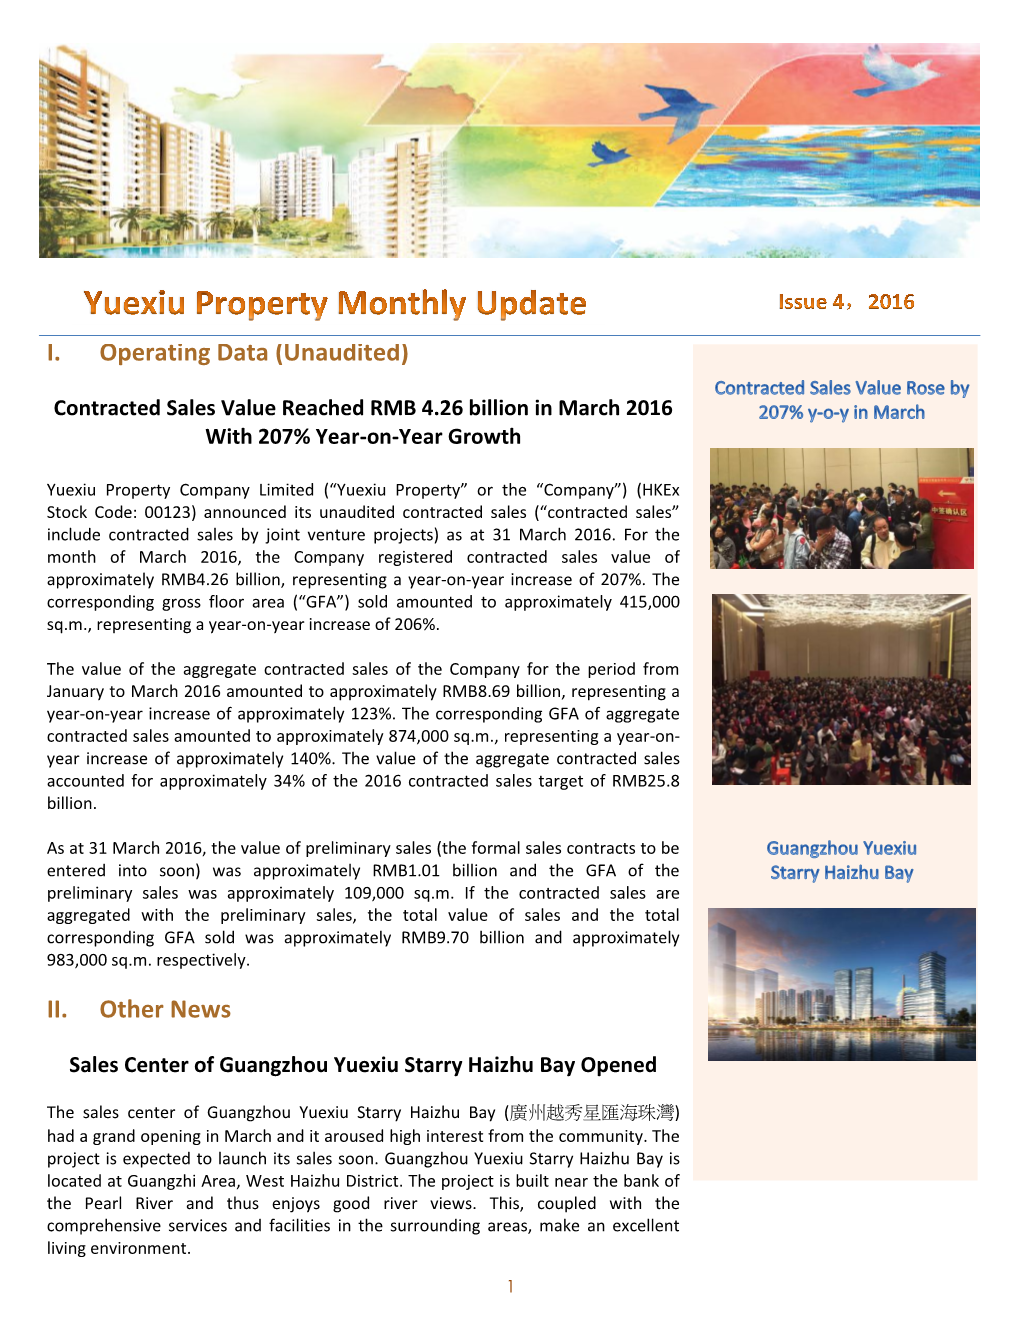 Yuexiu Property Monthly Updates Issue 4, 2016